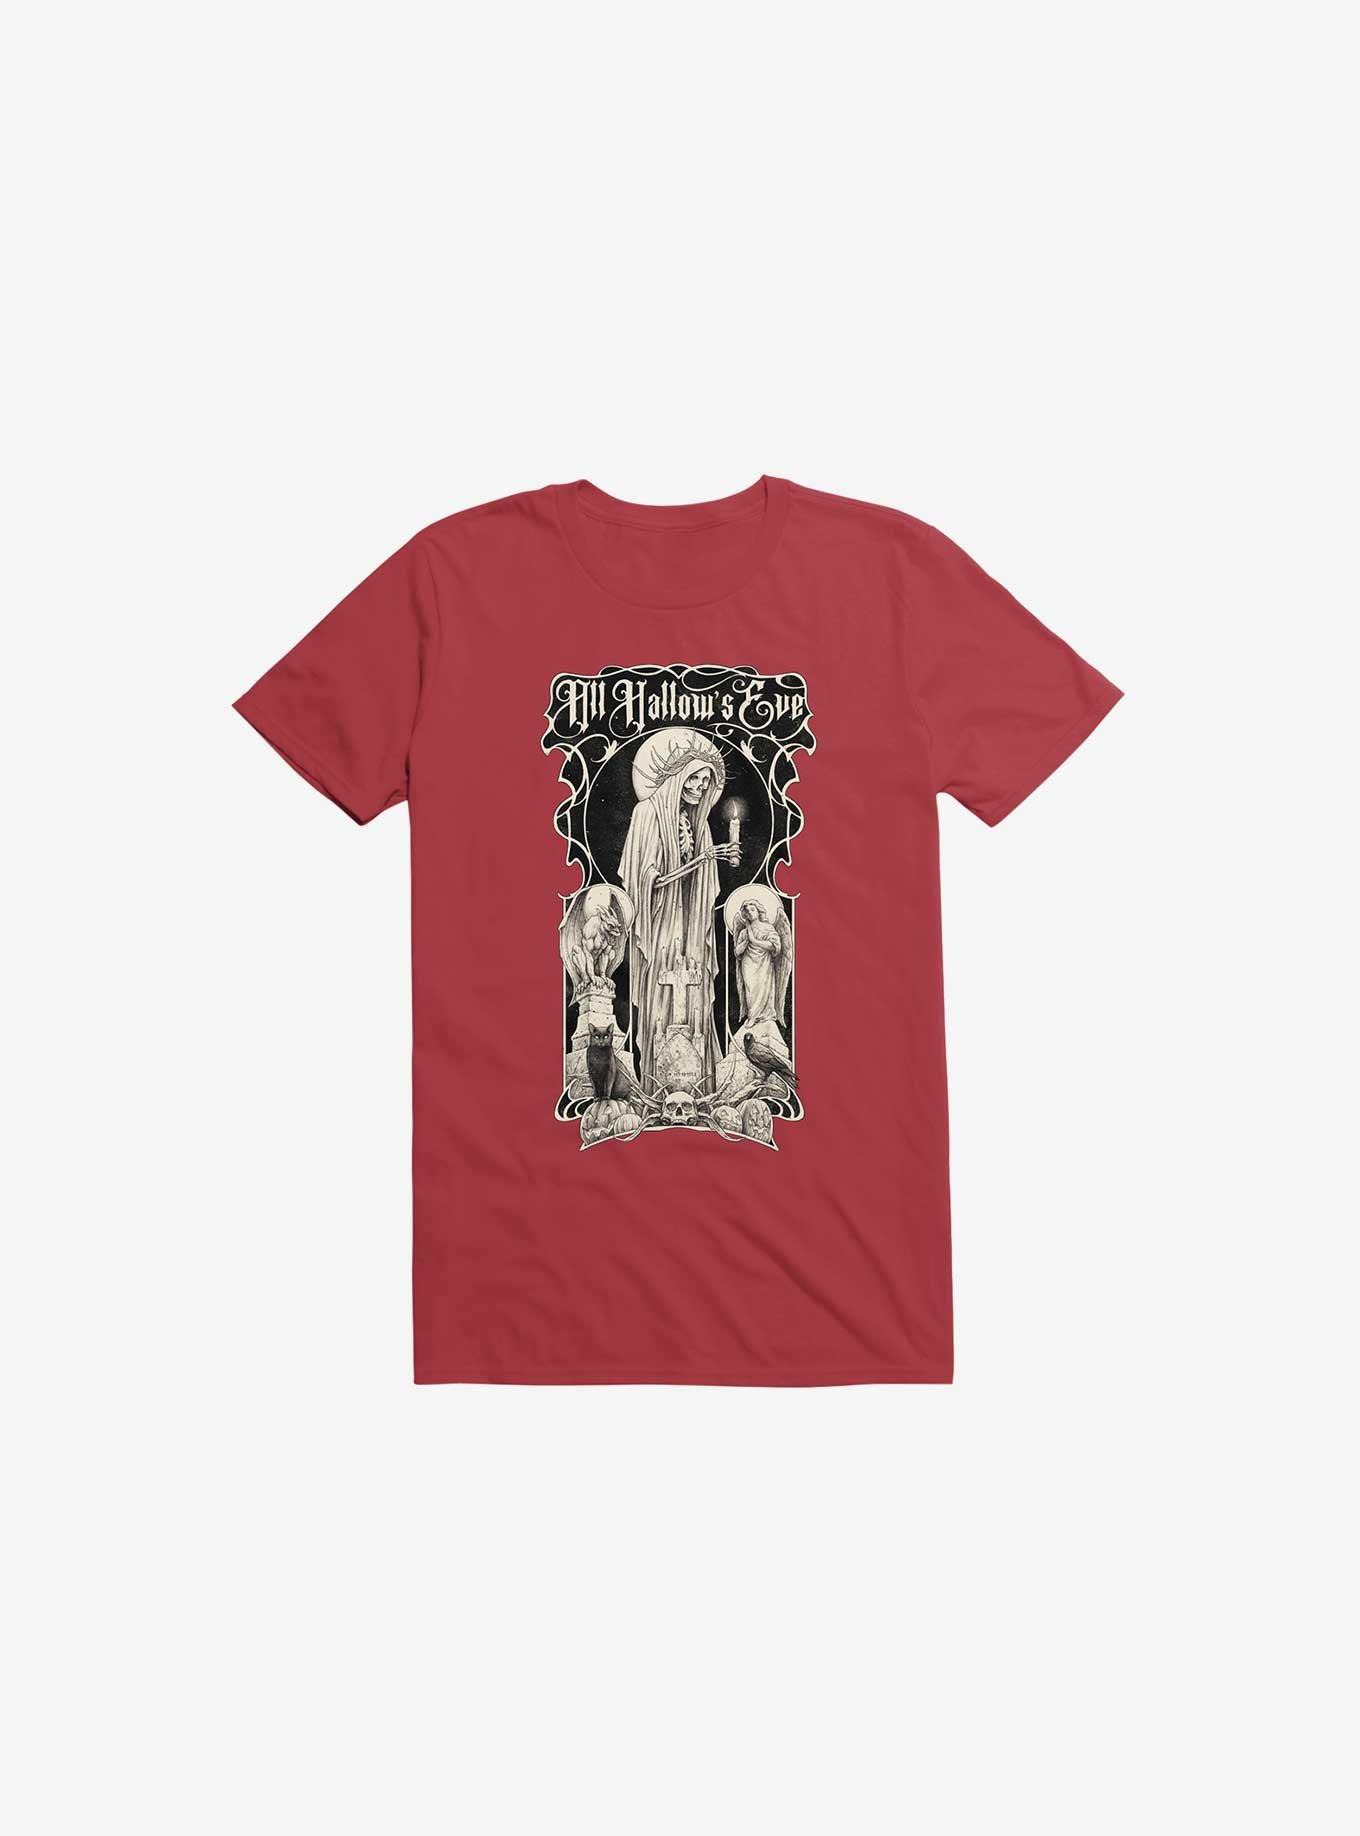 All Hallow's Eve Red T-Shirt, , hi-res